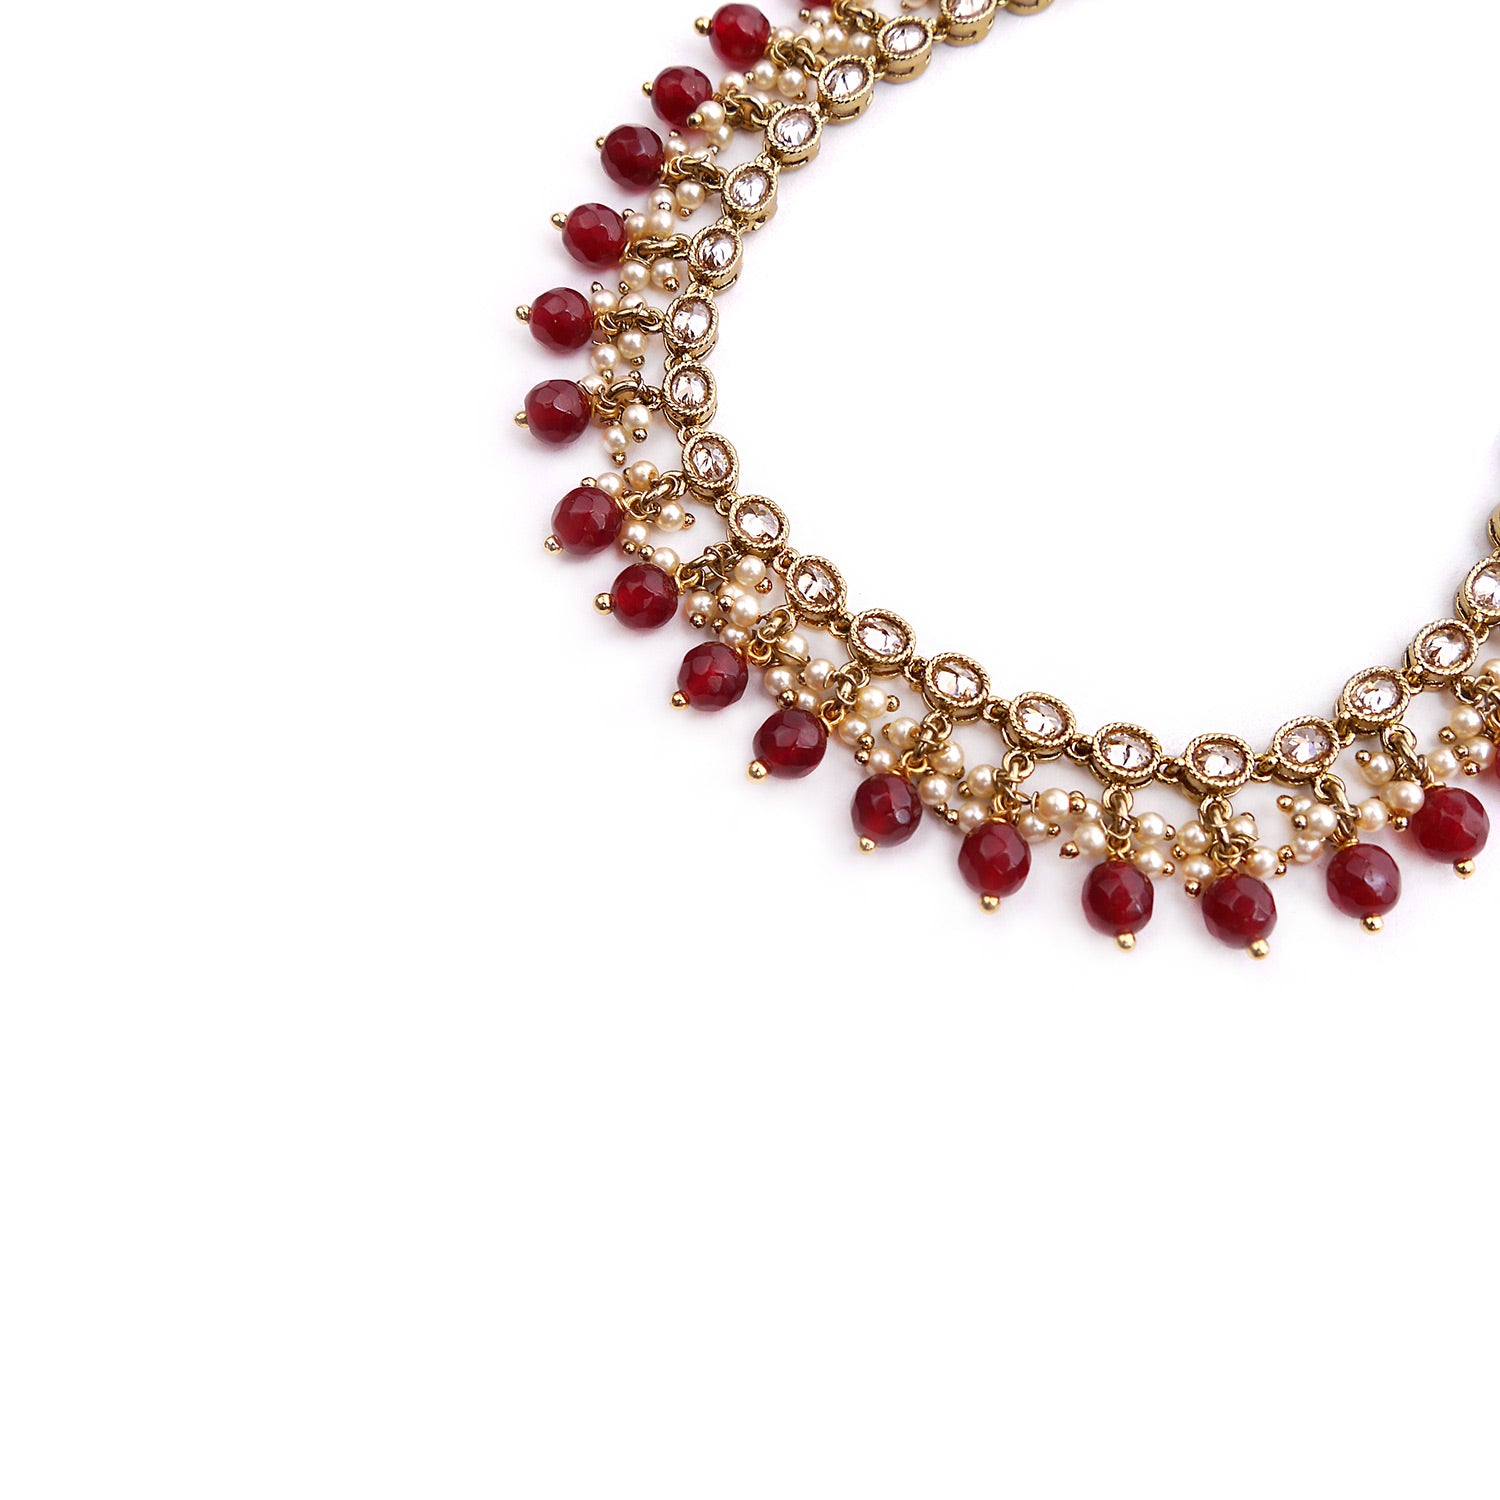 Antique Oval Anklet in Maroon